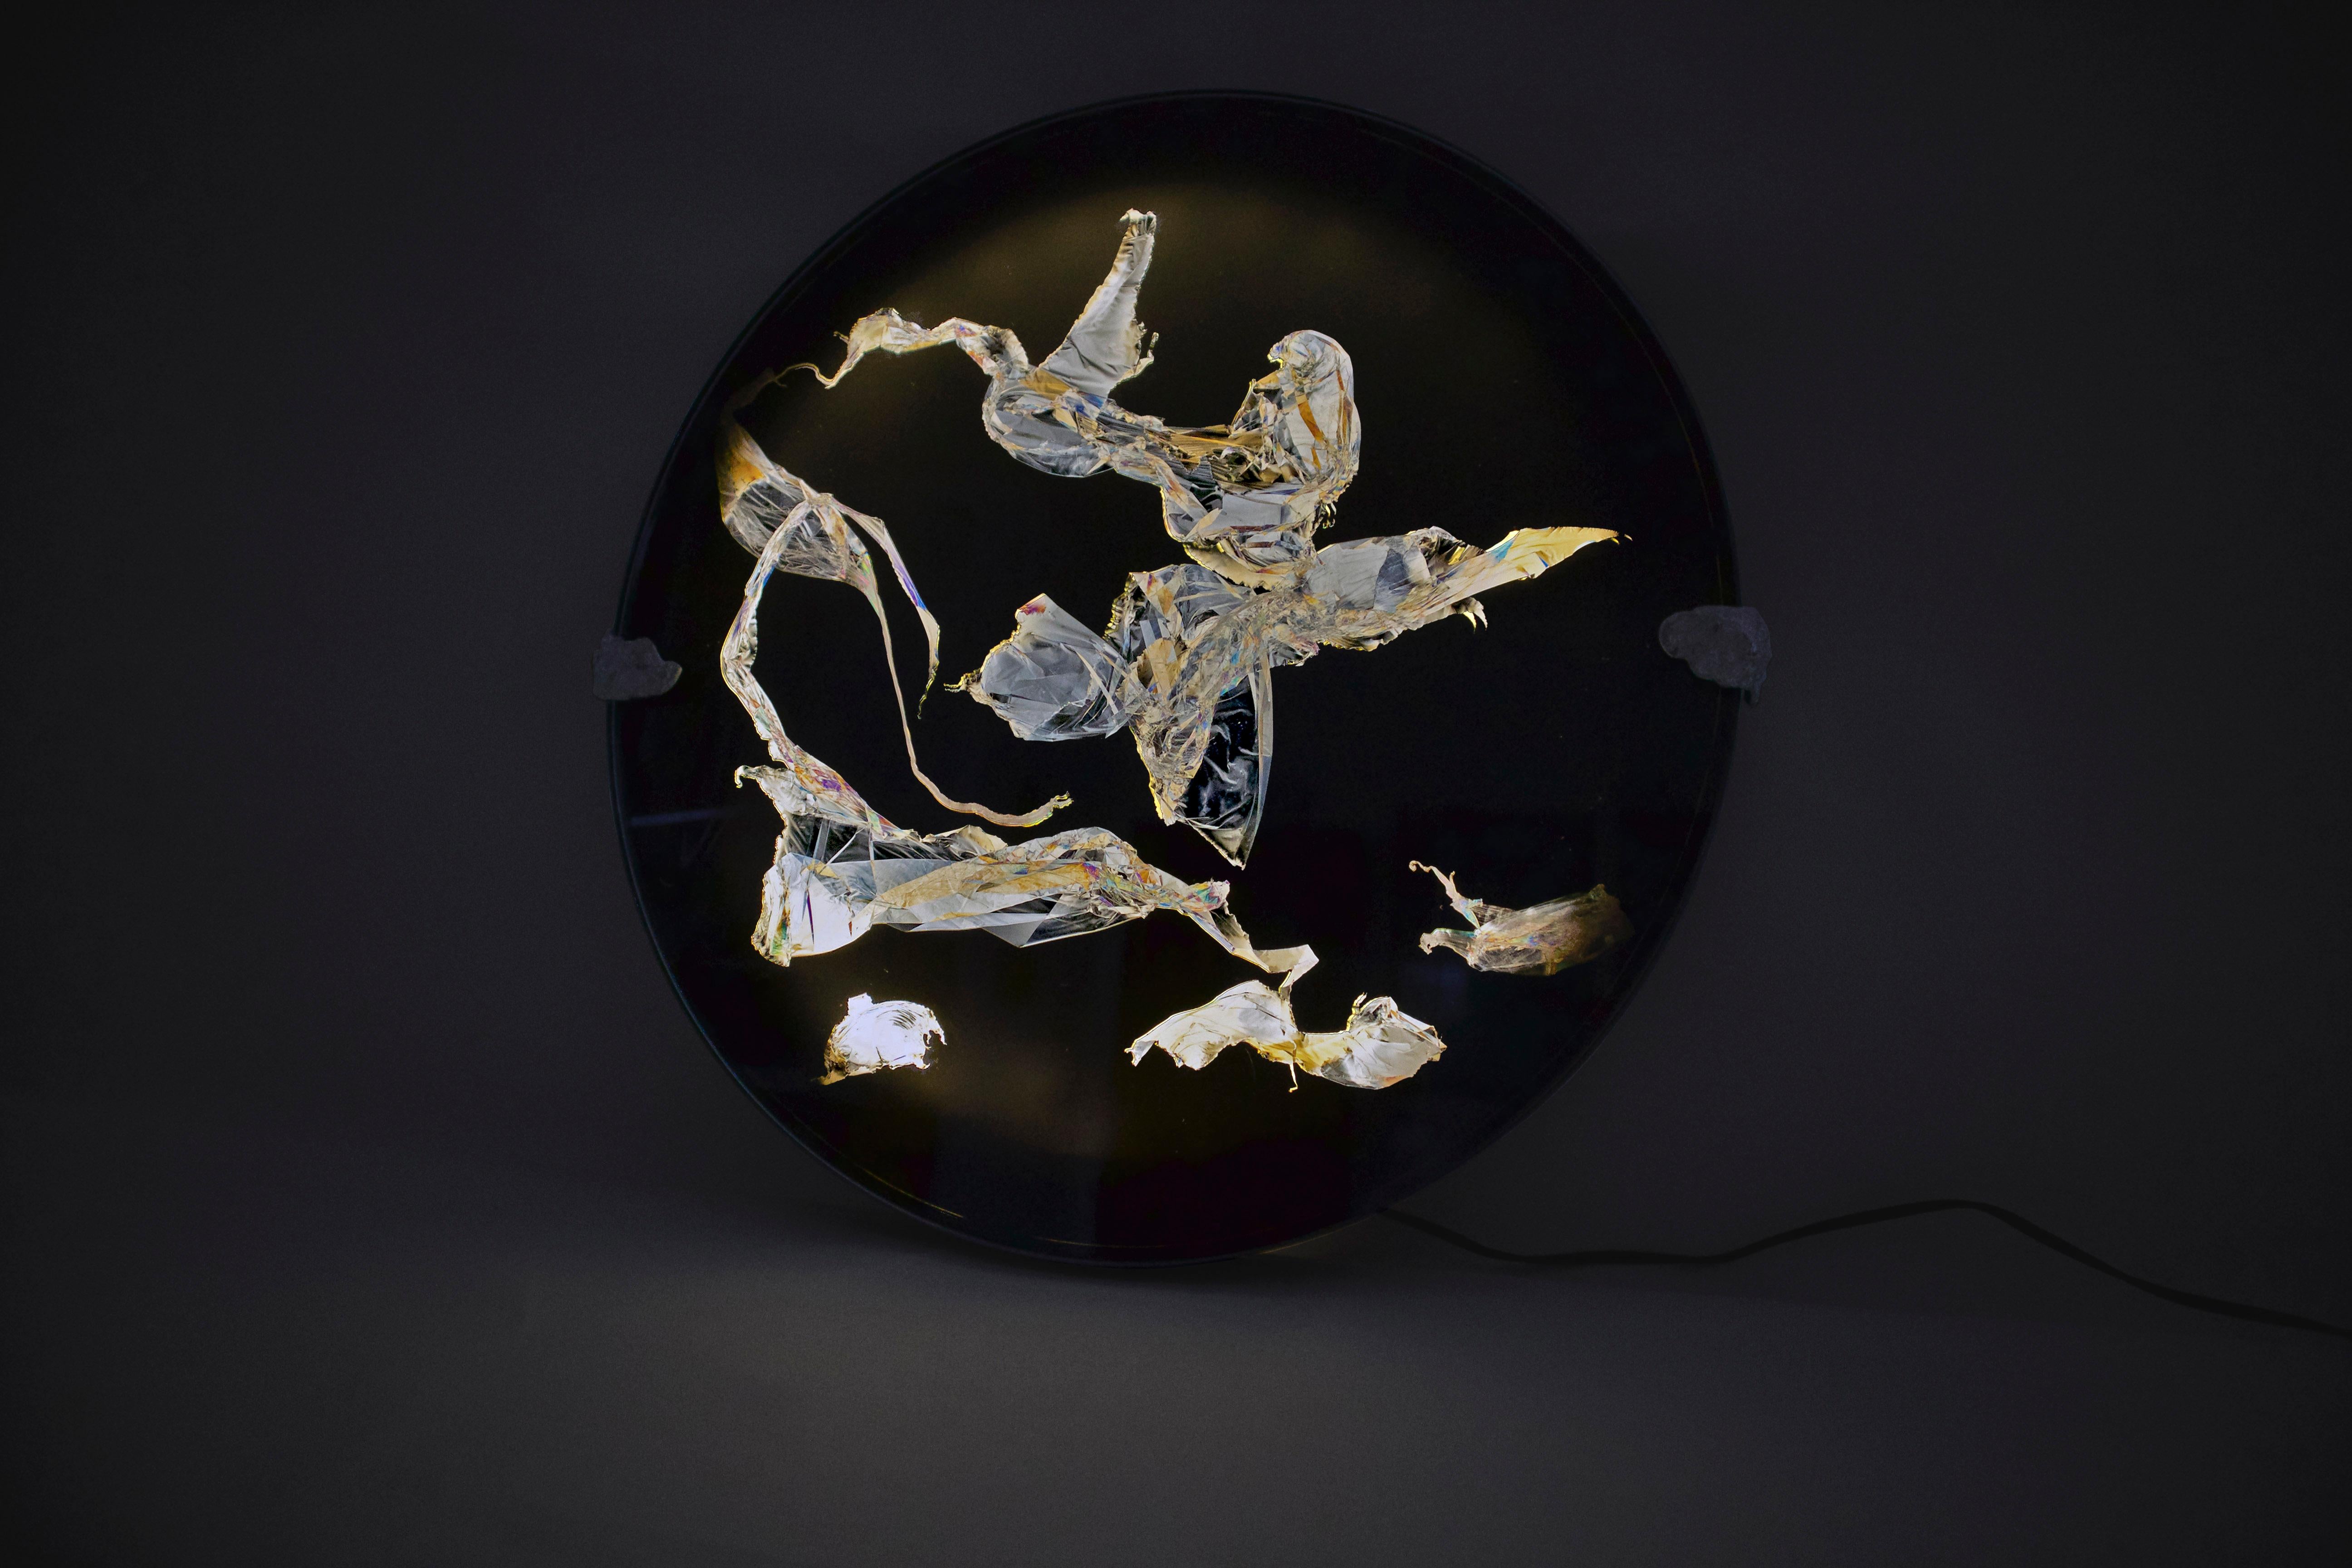 Wall lamp I by Kajsa Willner
Dimensions: 36,5 x 4 cm
Materials: polarized filters, disposable plastic

POLARIZED PORTRAITS
Polarized portraits is a set of wall lights and lamps that use polarized light to reveal stress patterns in clear